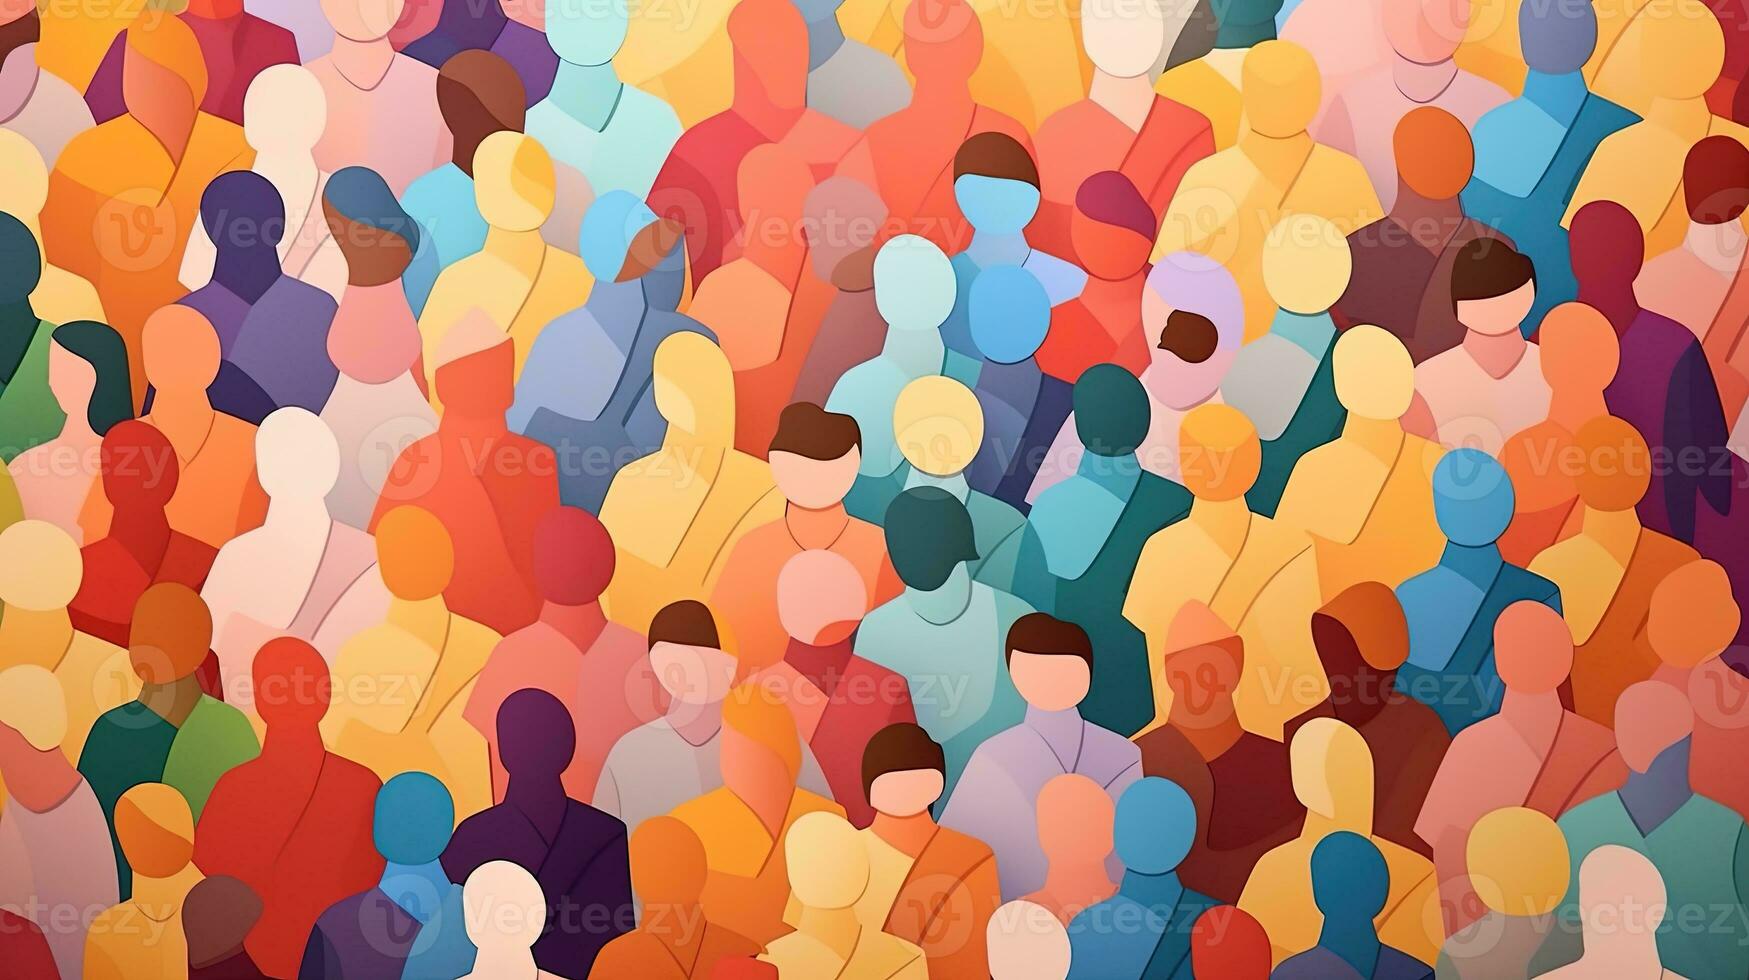 Large Crowd of Diverse People with Soft Bright Colorful Paper Cut Out Style photo